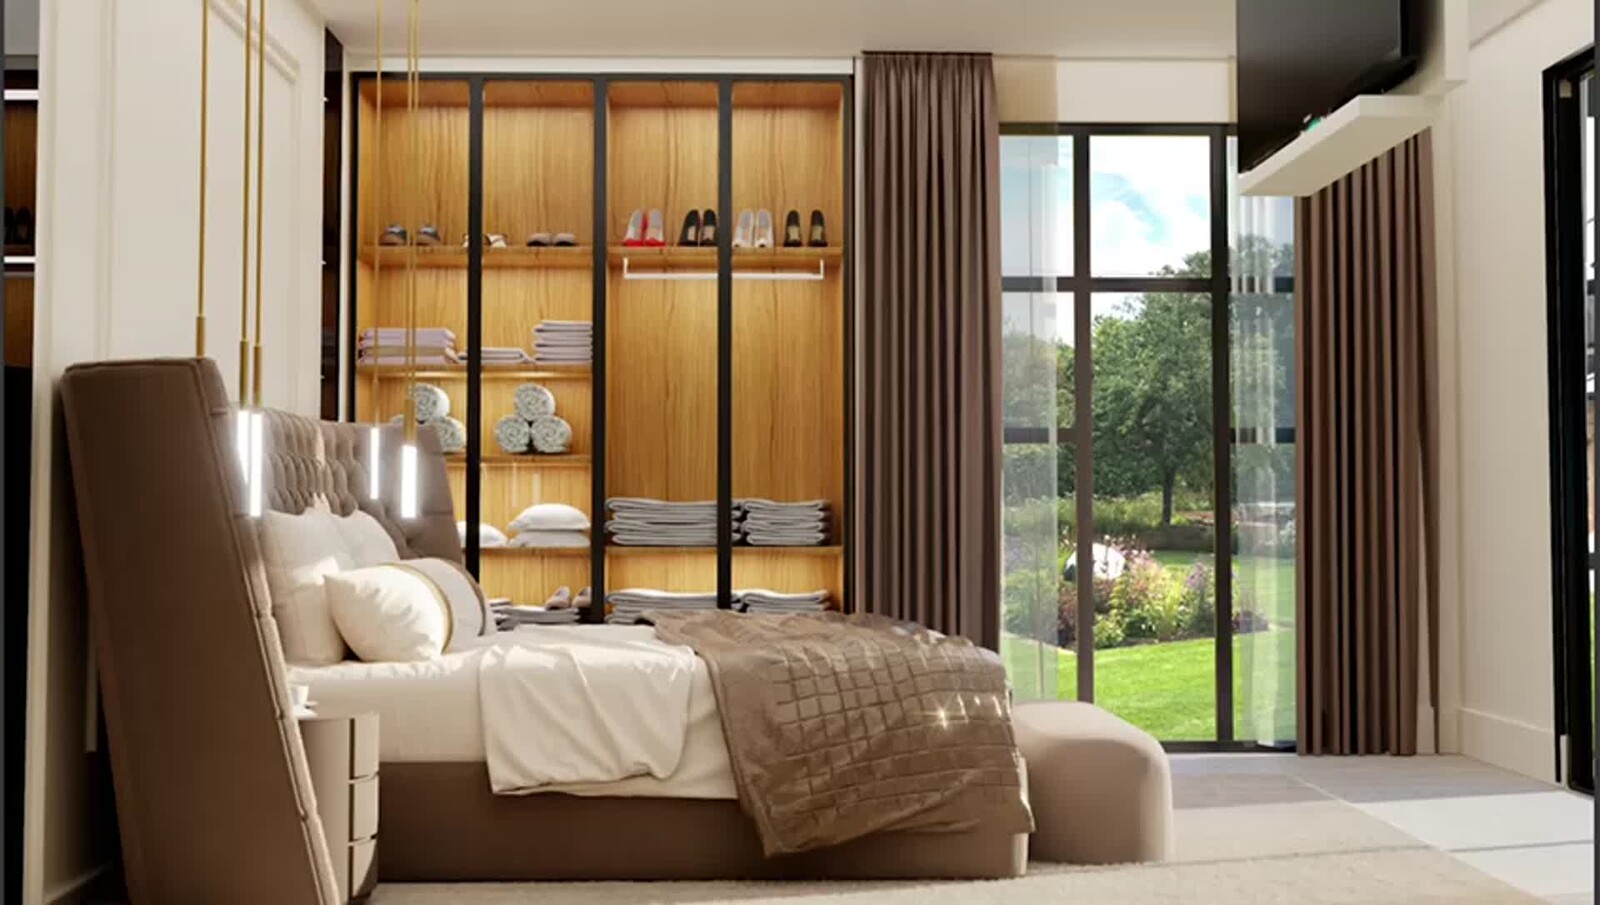 Master bedroom and closet